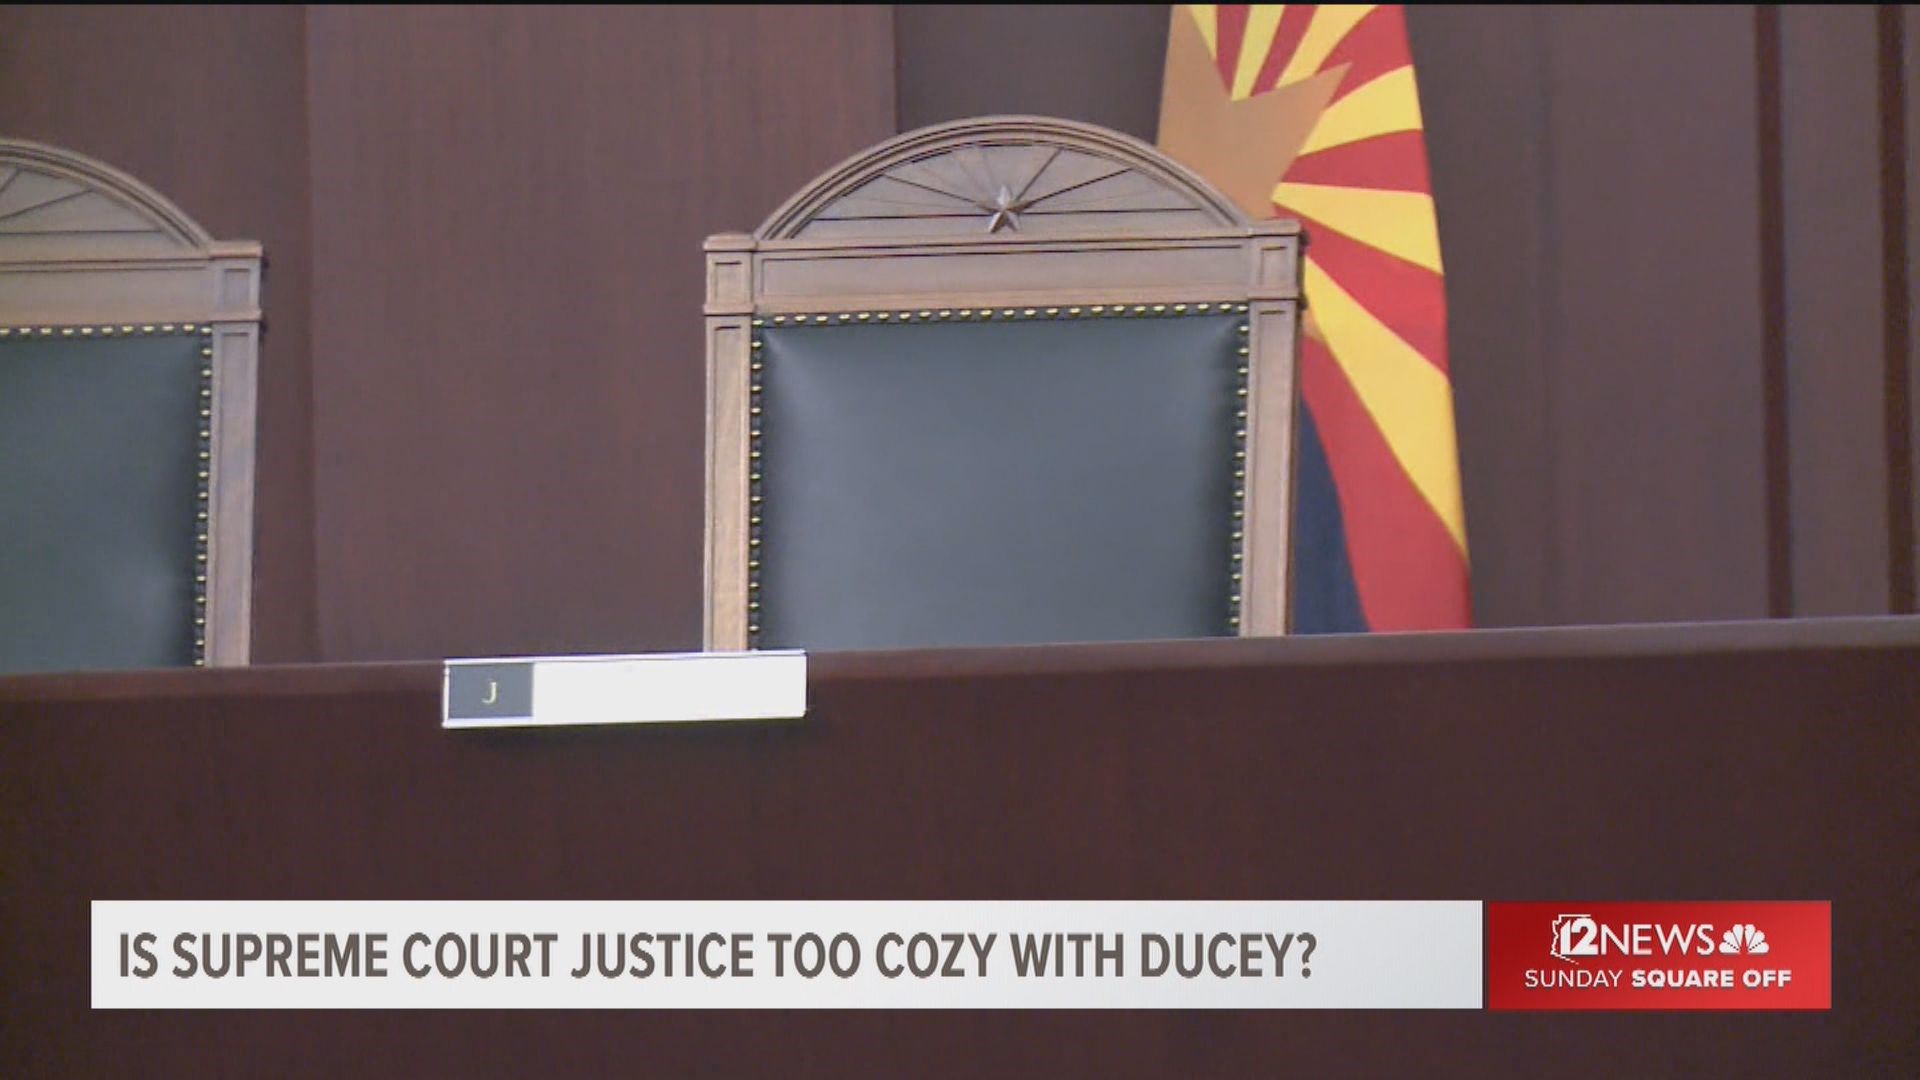 There are new questions about an Arizona Supreme Court justice's apparently cozy relationship with Gov. Doug Ducey, after a reporter obtains text messages showing Justice Clint Bolick urging Ducey to appoint Maricopa County Attorney Bill Montgomery to a vacant U.S. Senate seat.